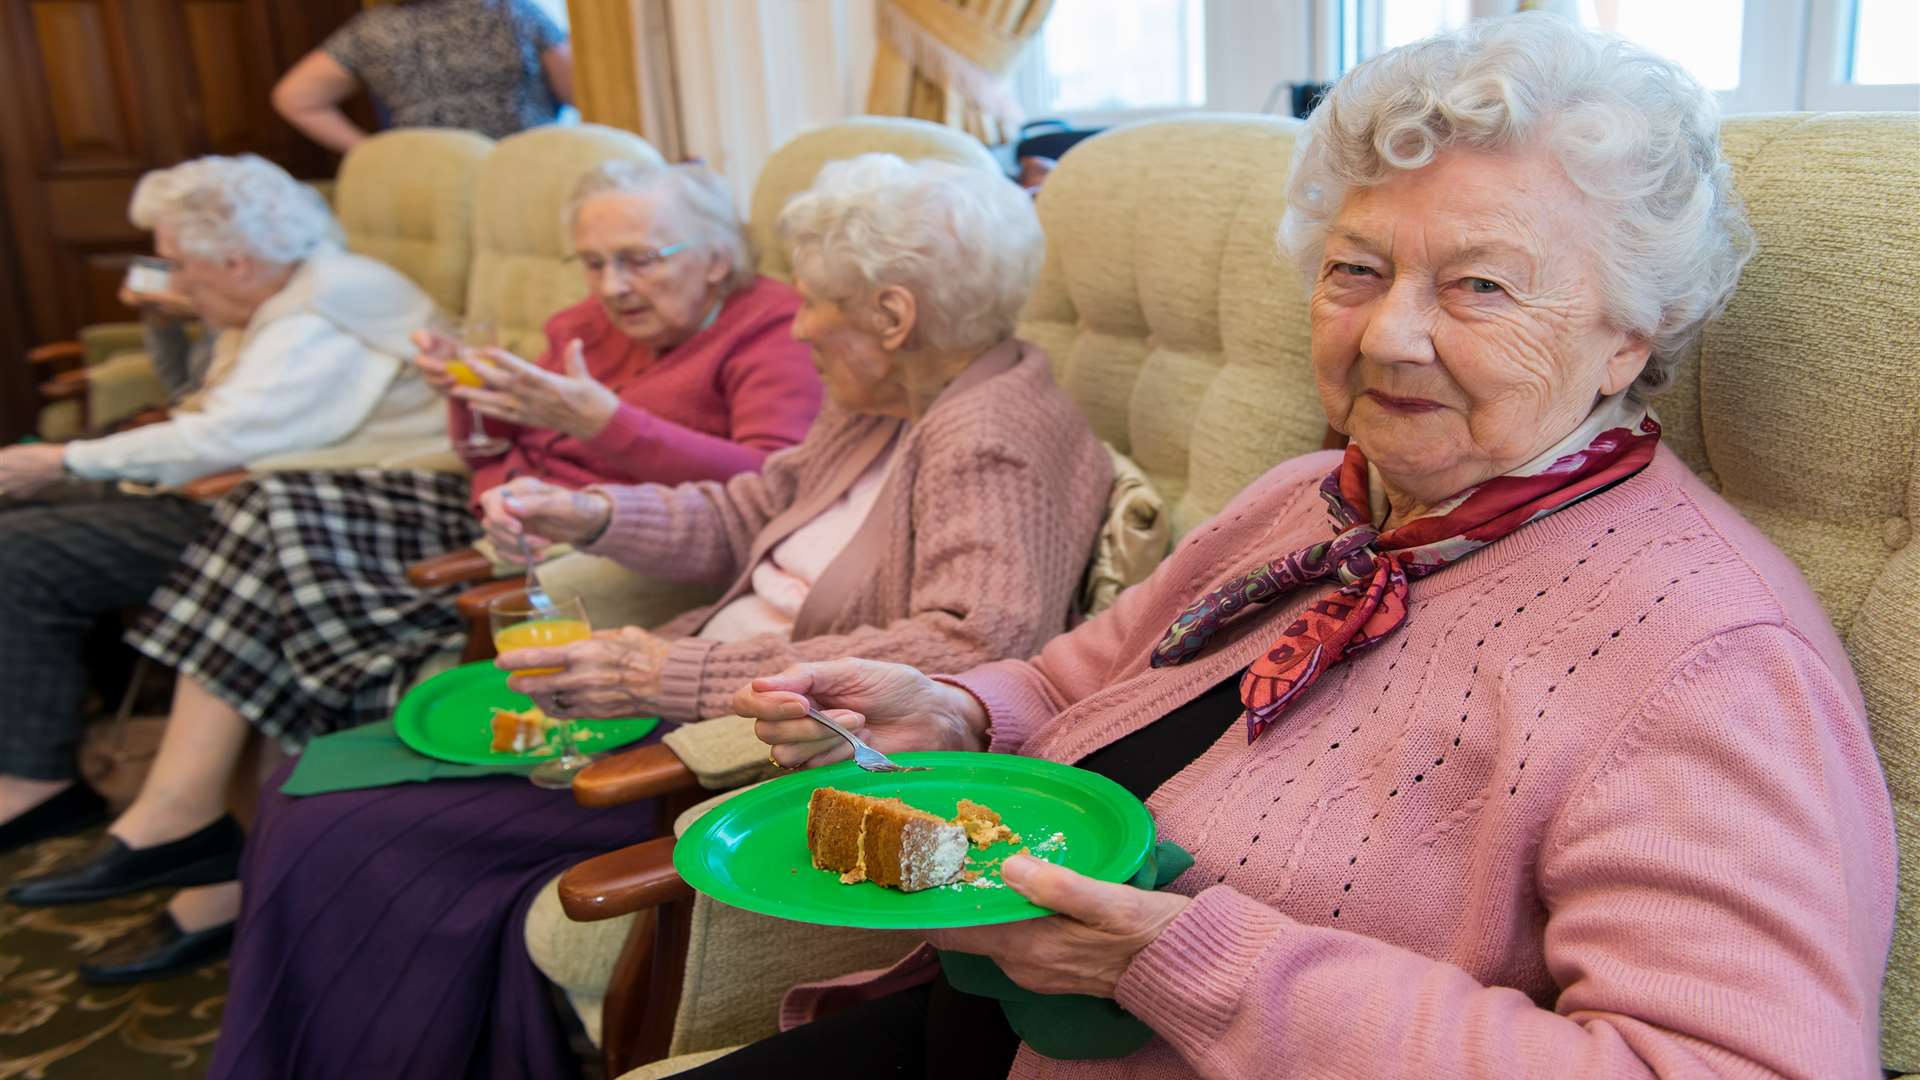 Residents enjoy a slice of cake and a bucks fizz at the event.